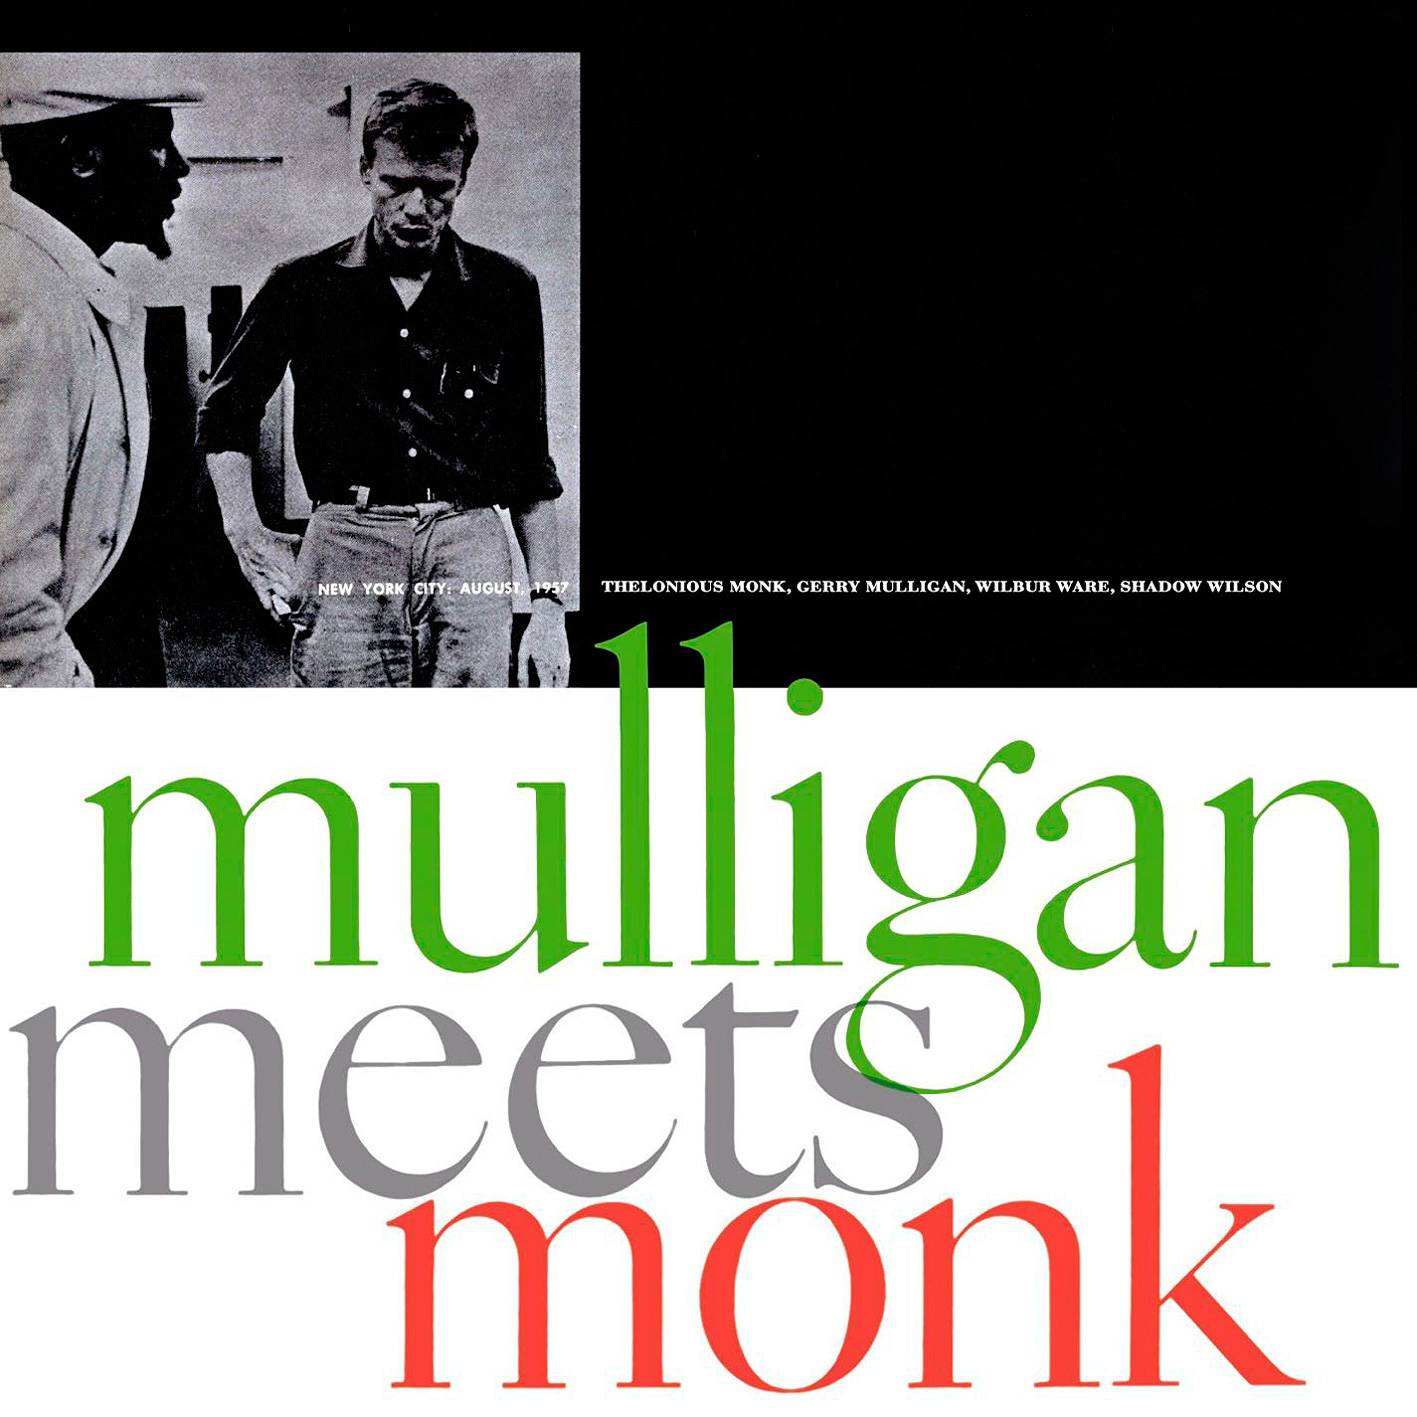 Thelonious Monk, Gerry Mulligan – Mulligan Meets Monk (1957) [Reissue 2004] SACD ISO + Hi-Res FLAC